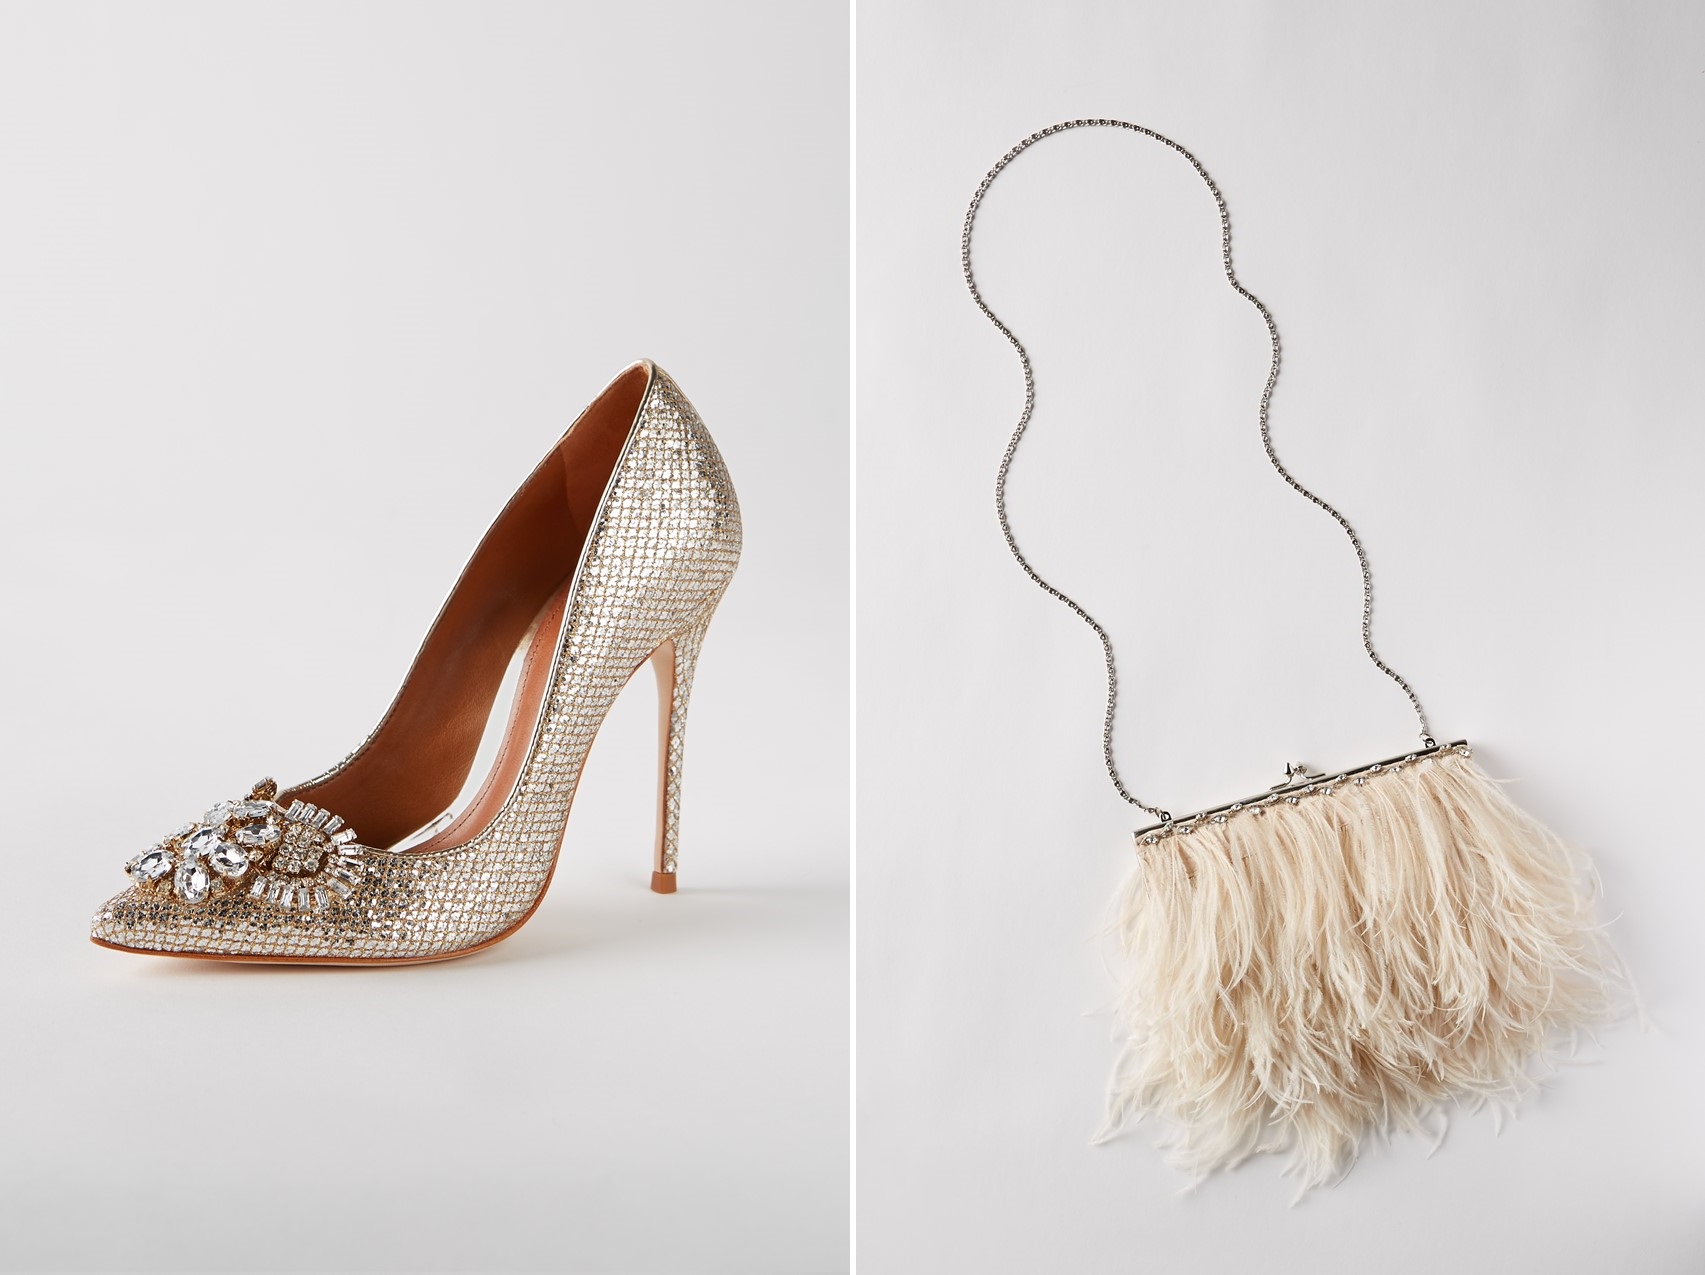 Ambrose Heels & Aigrette Clutch from BHLDN's Stunning Fall 2015 Collection ‘Twice Enchanted’